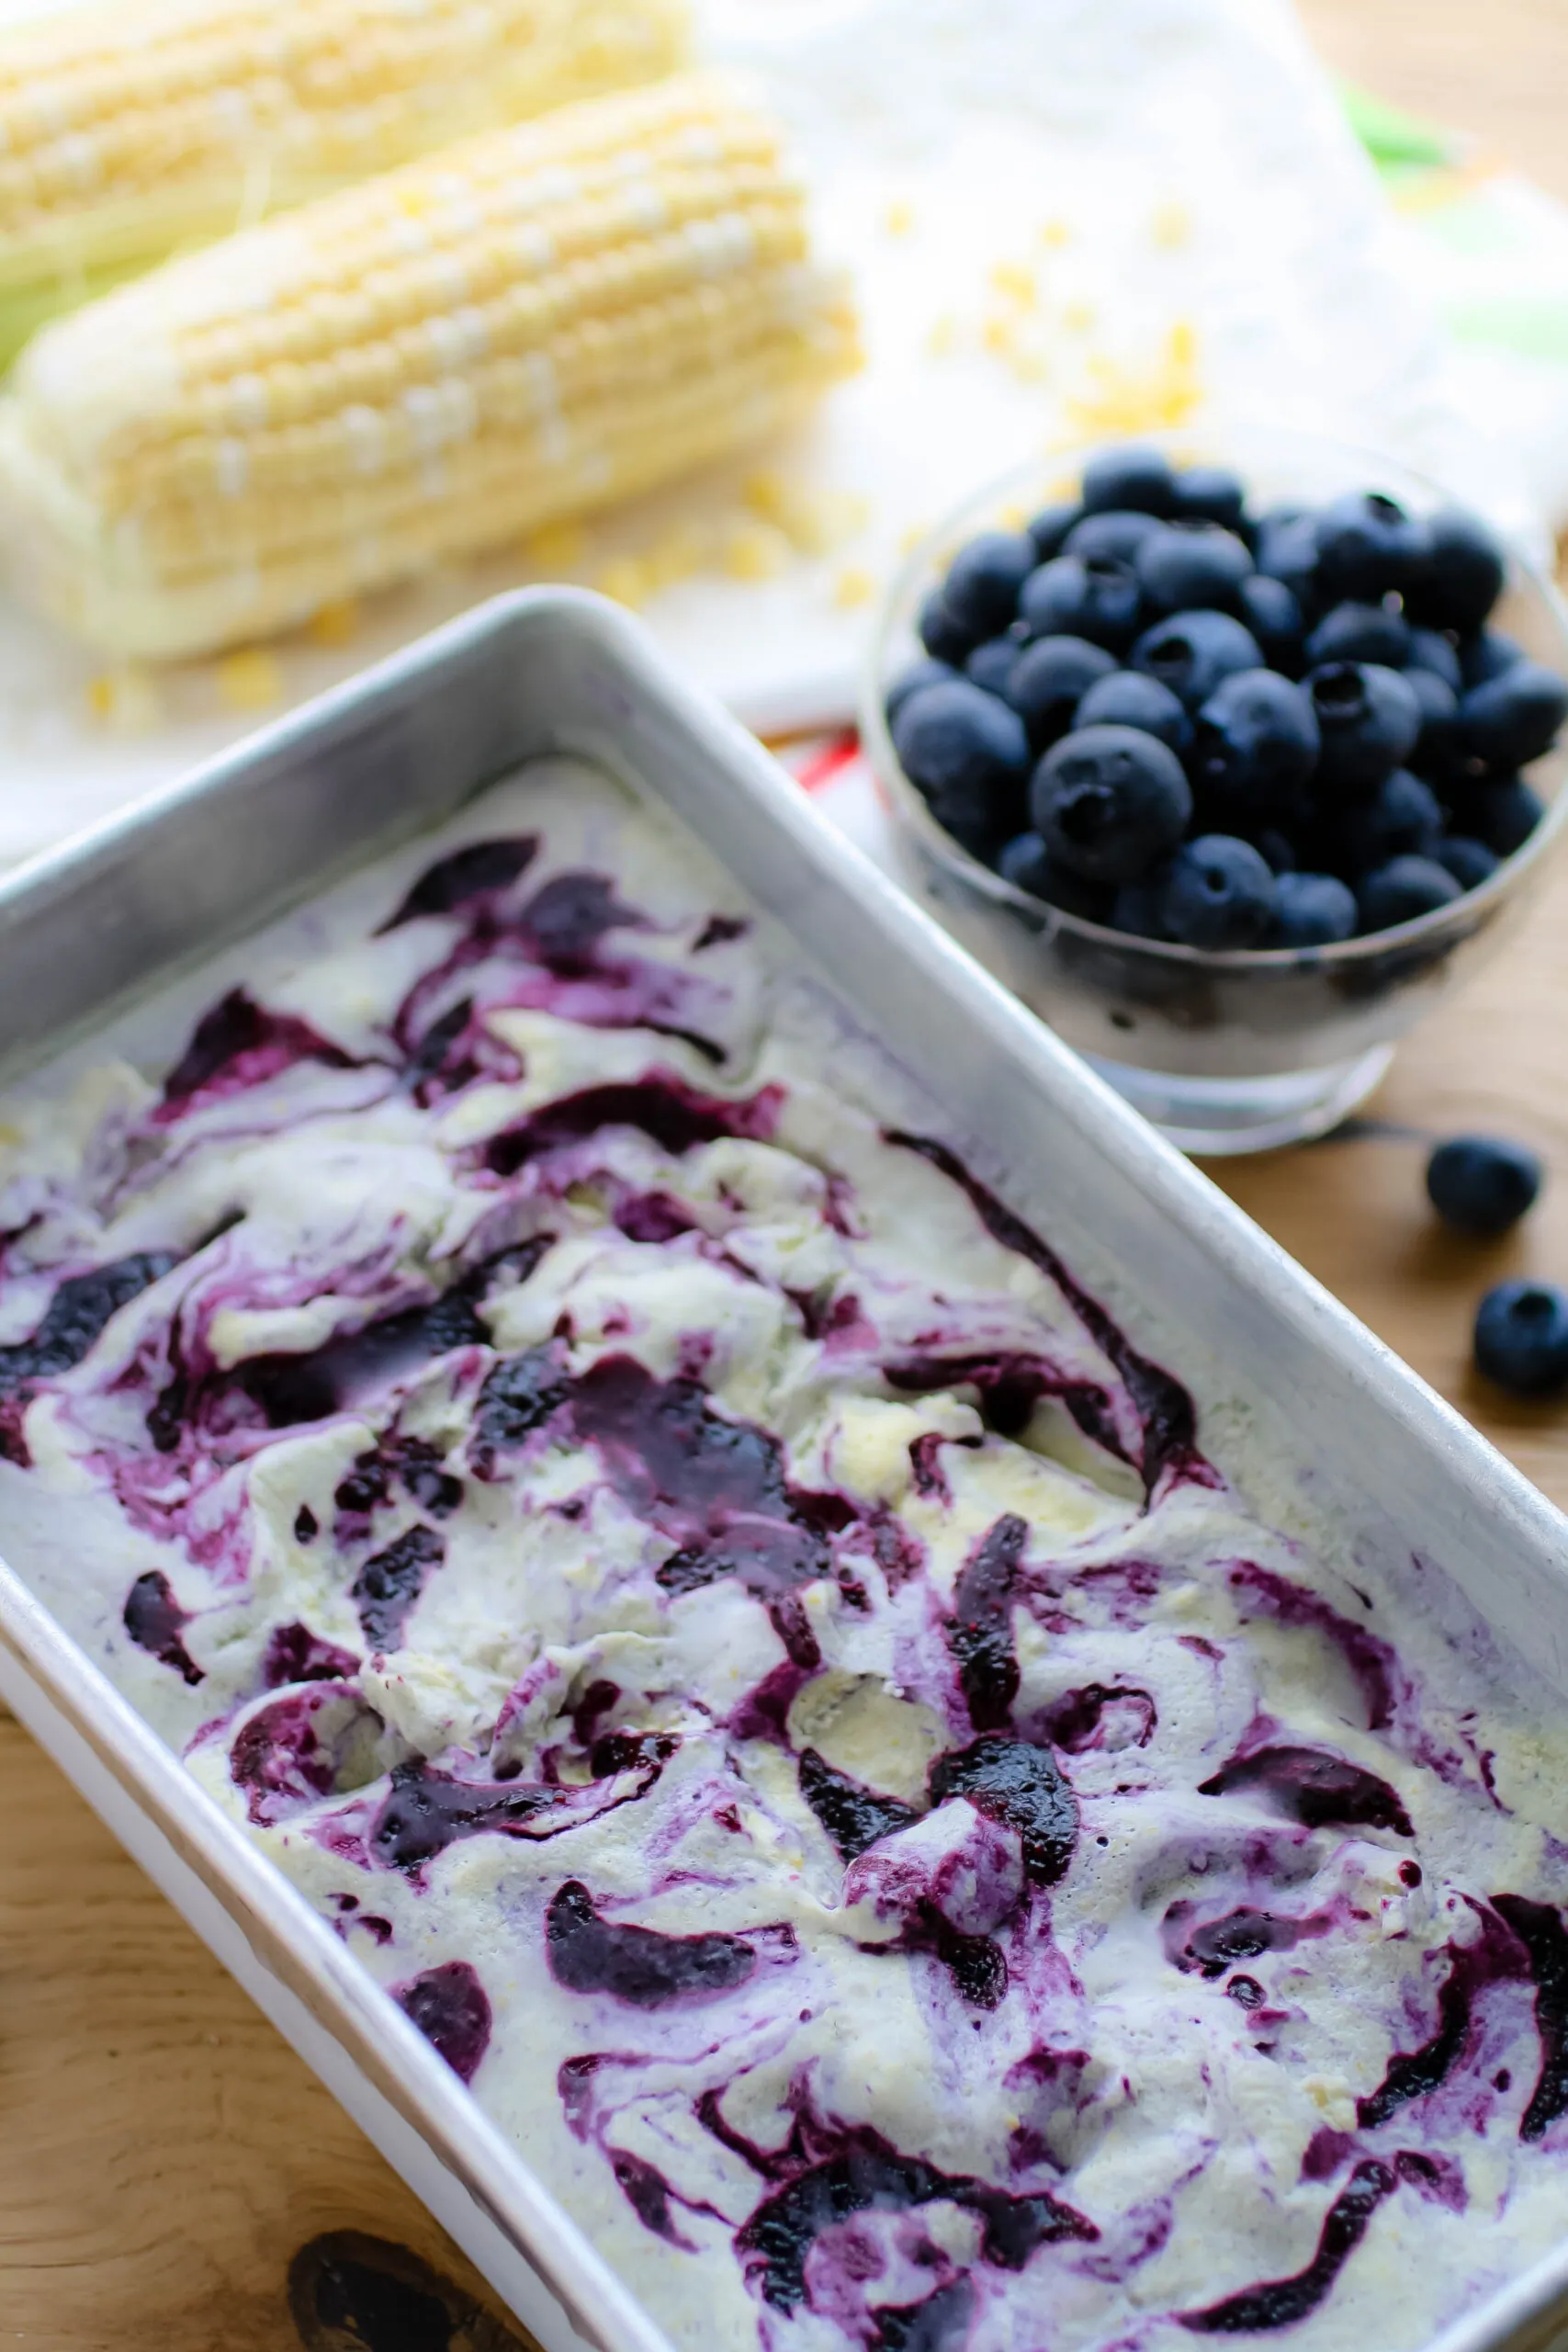 Sweet Corn and Blueberry Ice Cream is a frozen treat that has 